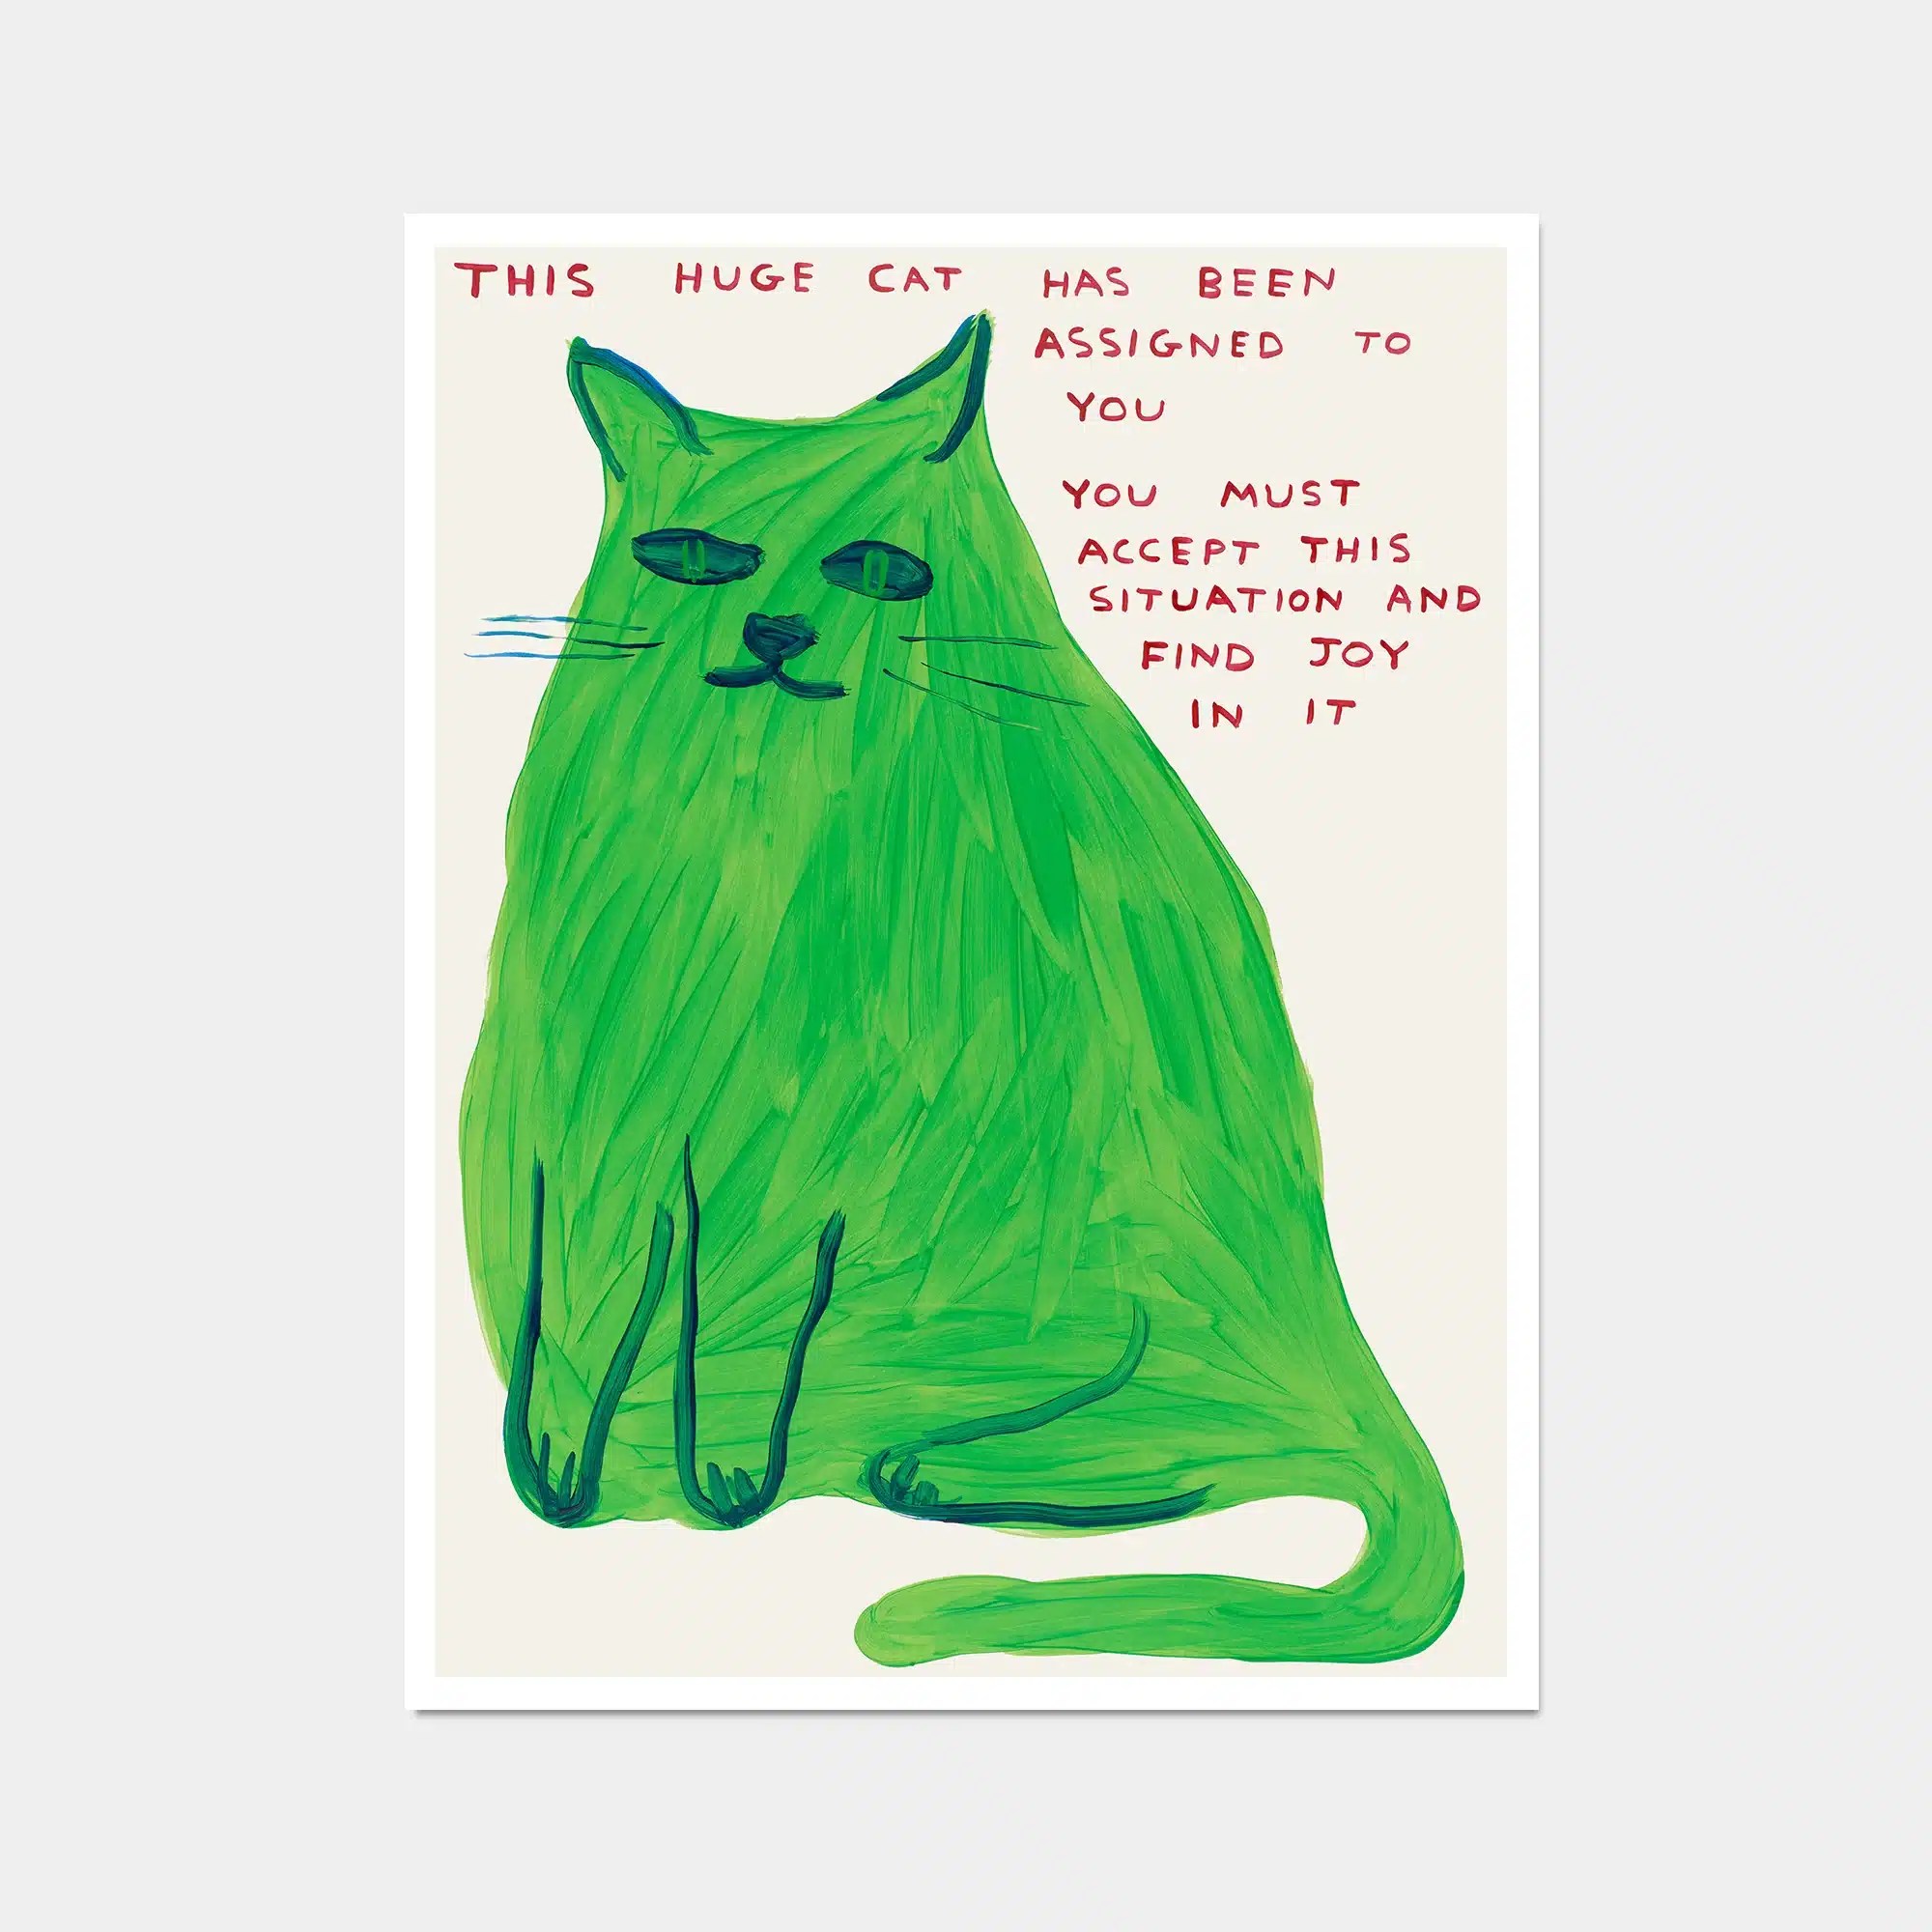 David Hockney Ceramic Cat Could Fetch Thousands At Auction 2